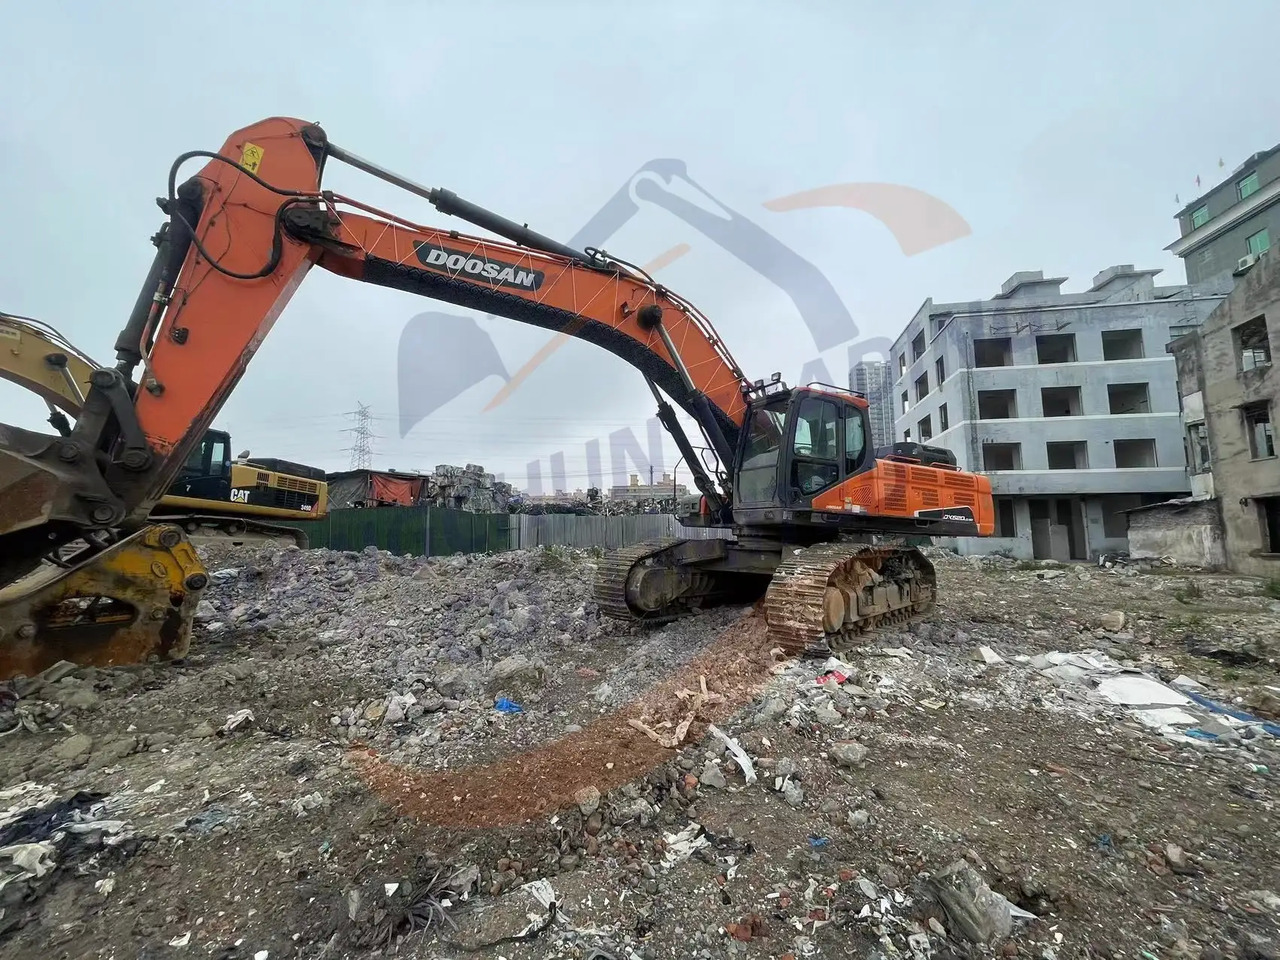 Pelle sur chenille Low running hours Used Doosan excavator DX520LC-9C in good condition for sale: photos 5